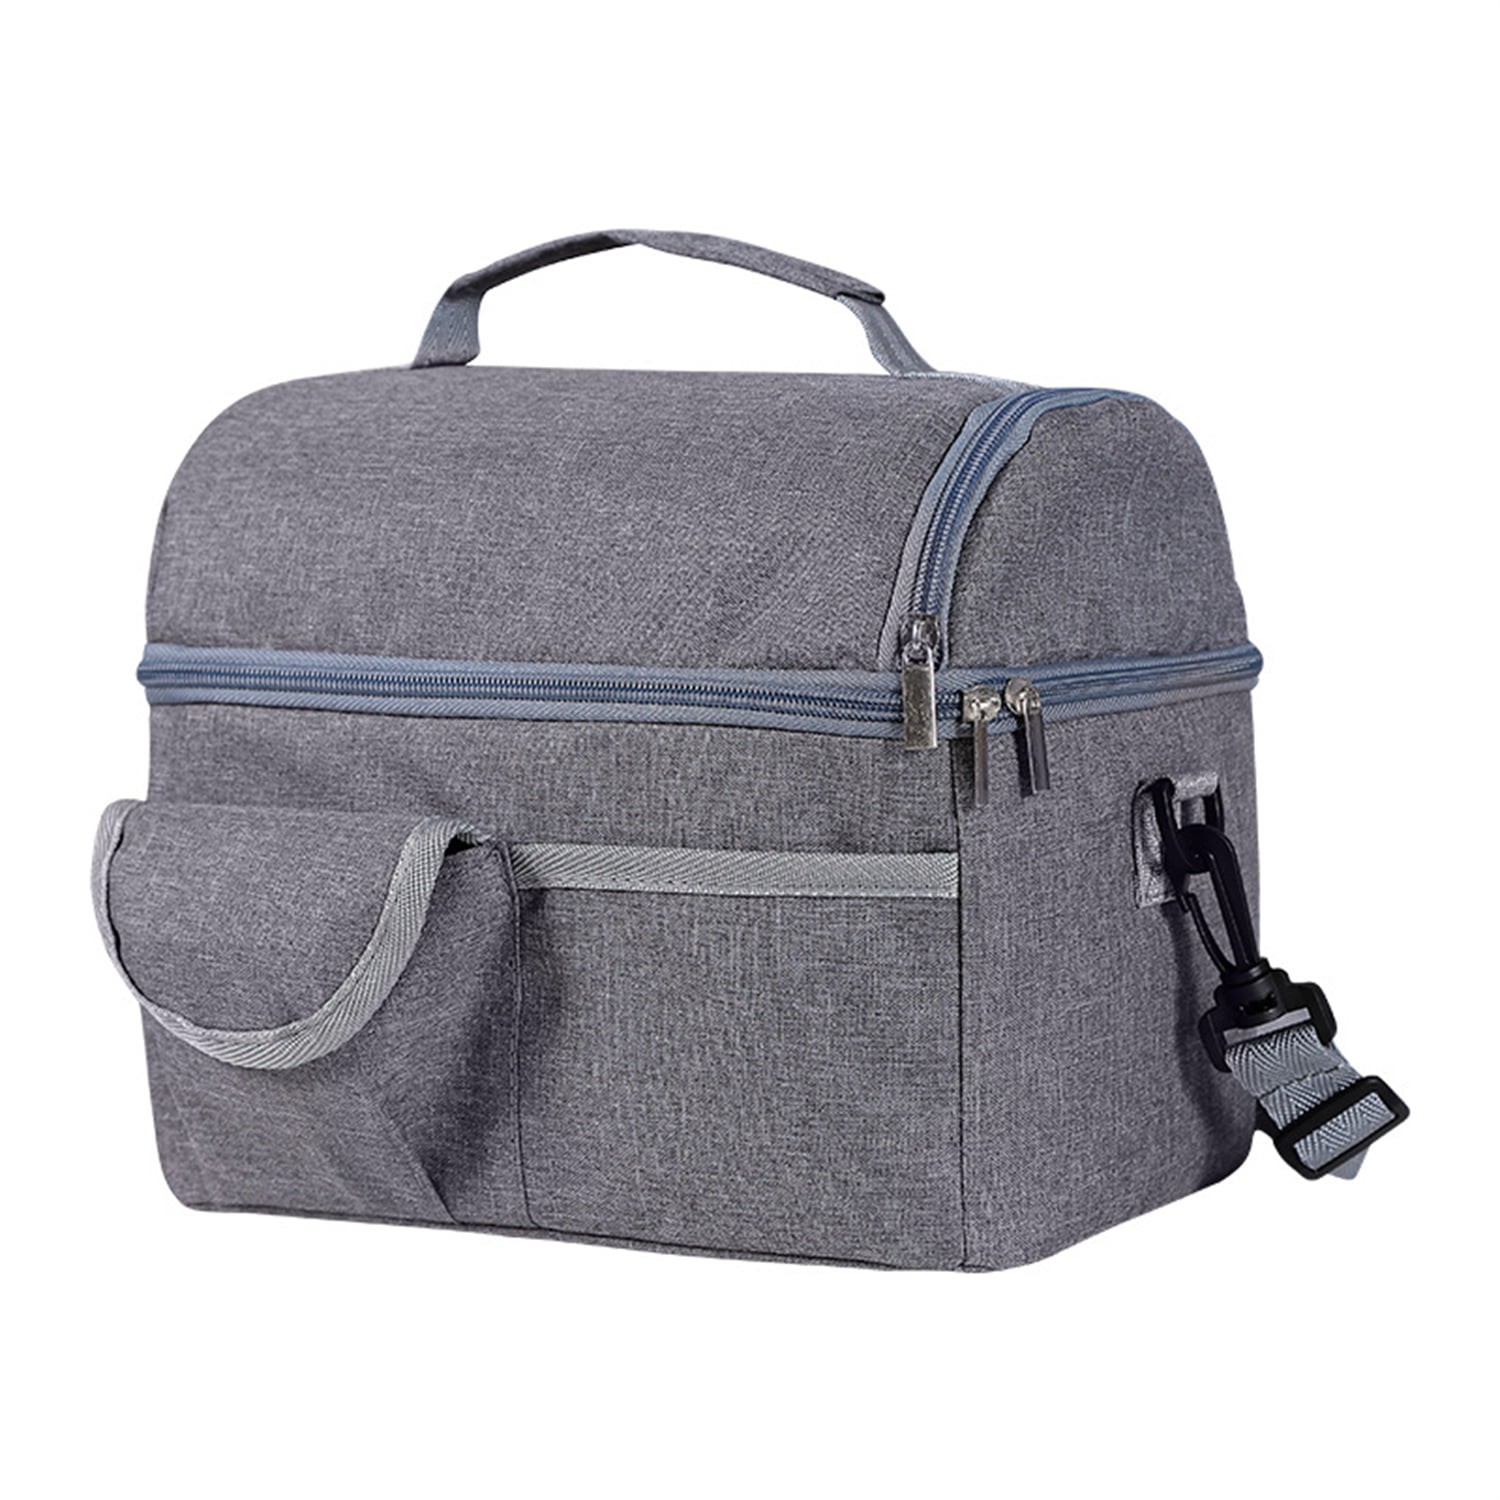 Large Capacity Insulated Lunch Bag, Shoulder Lunch Box - Walmart.com